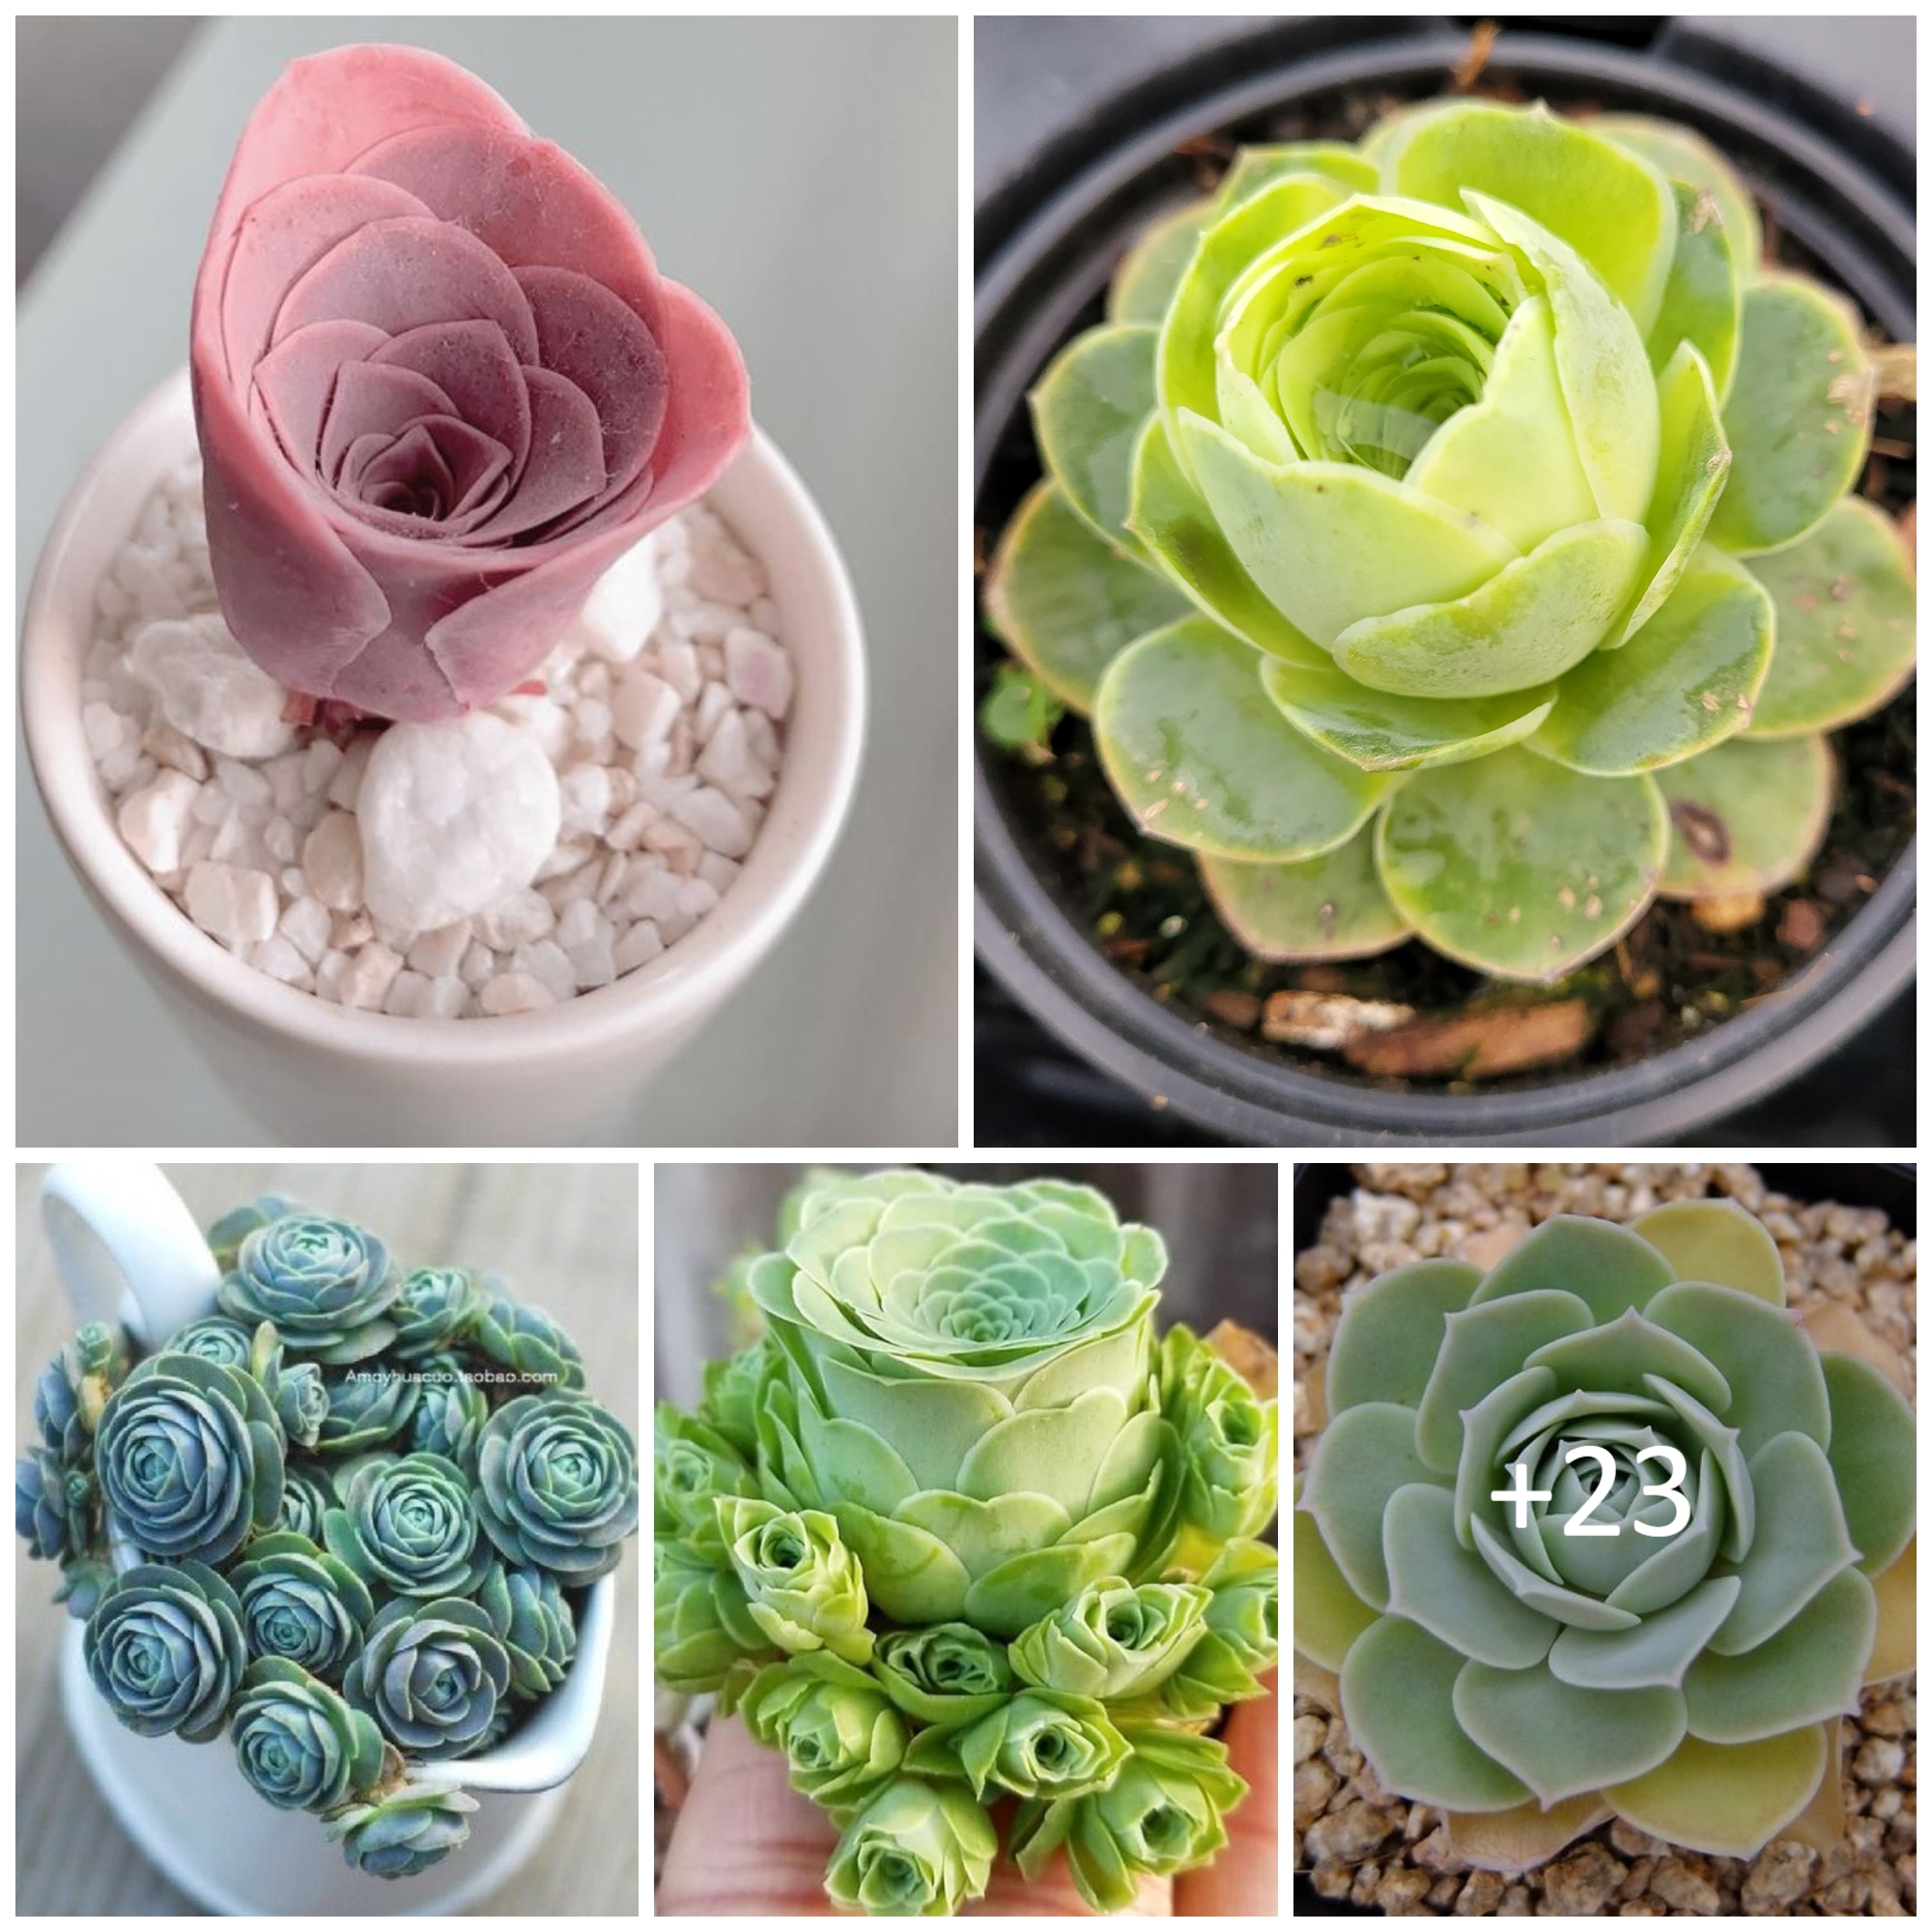 How to Care for and Grow Beautiful Rose Succulents